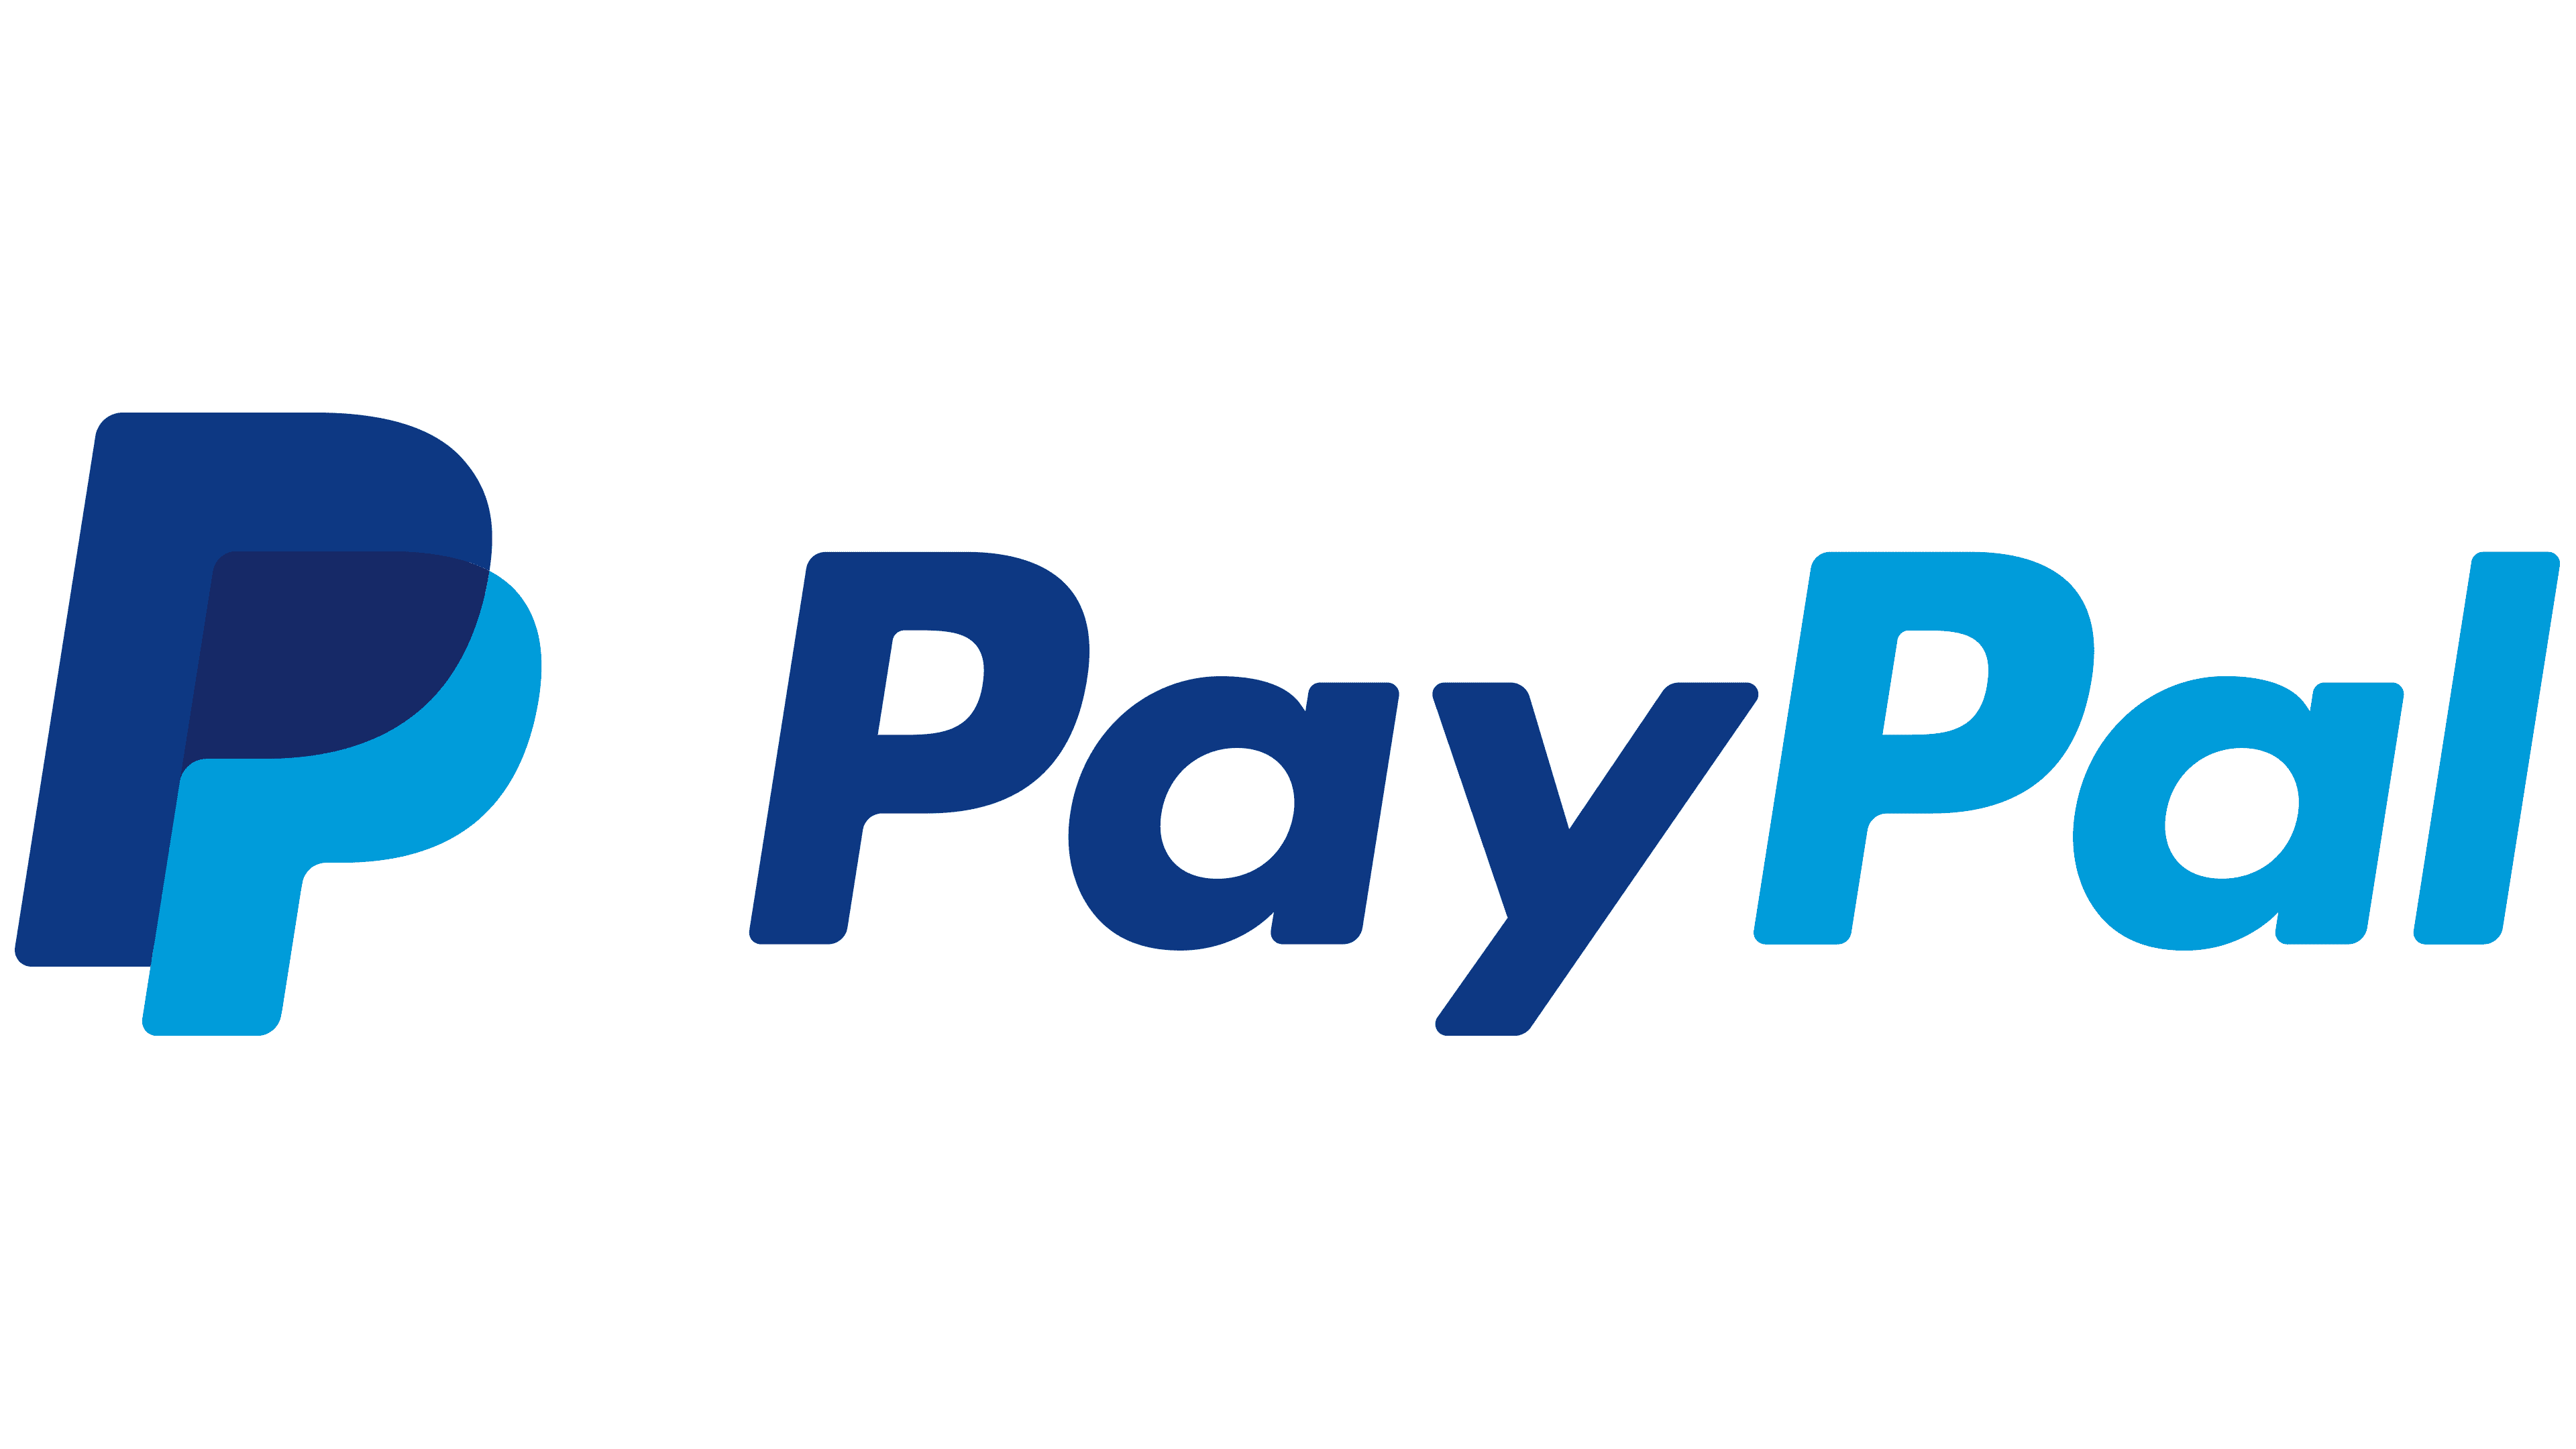 Information about PayPal